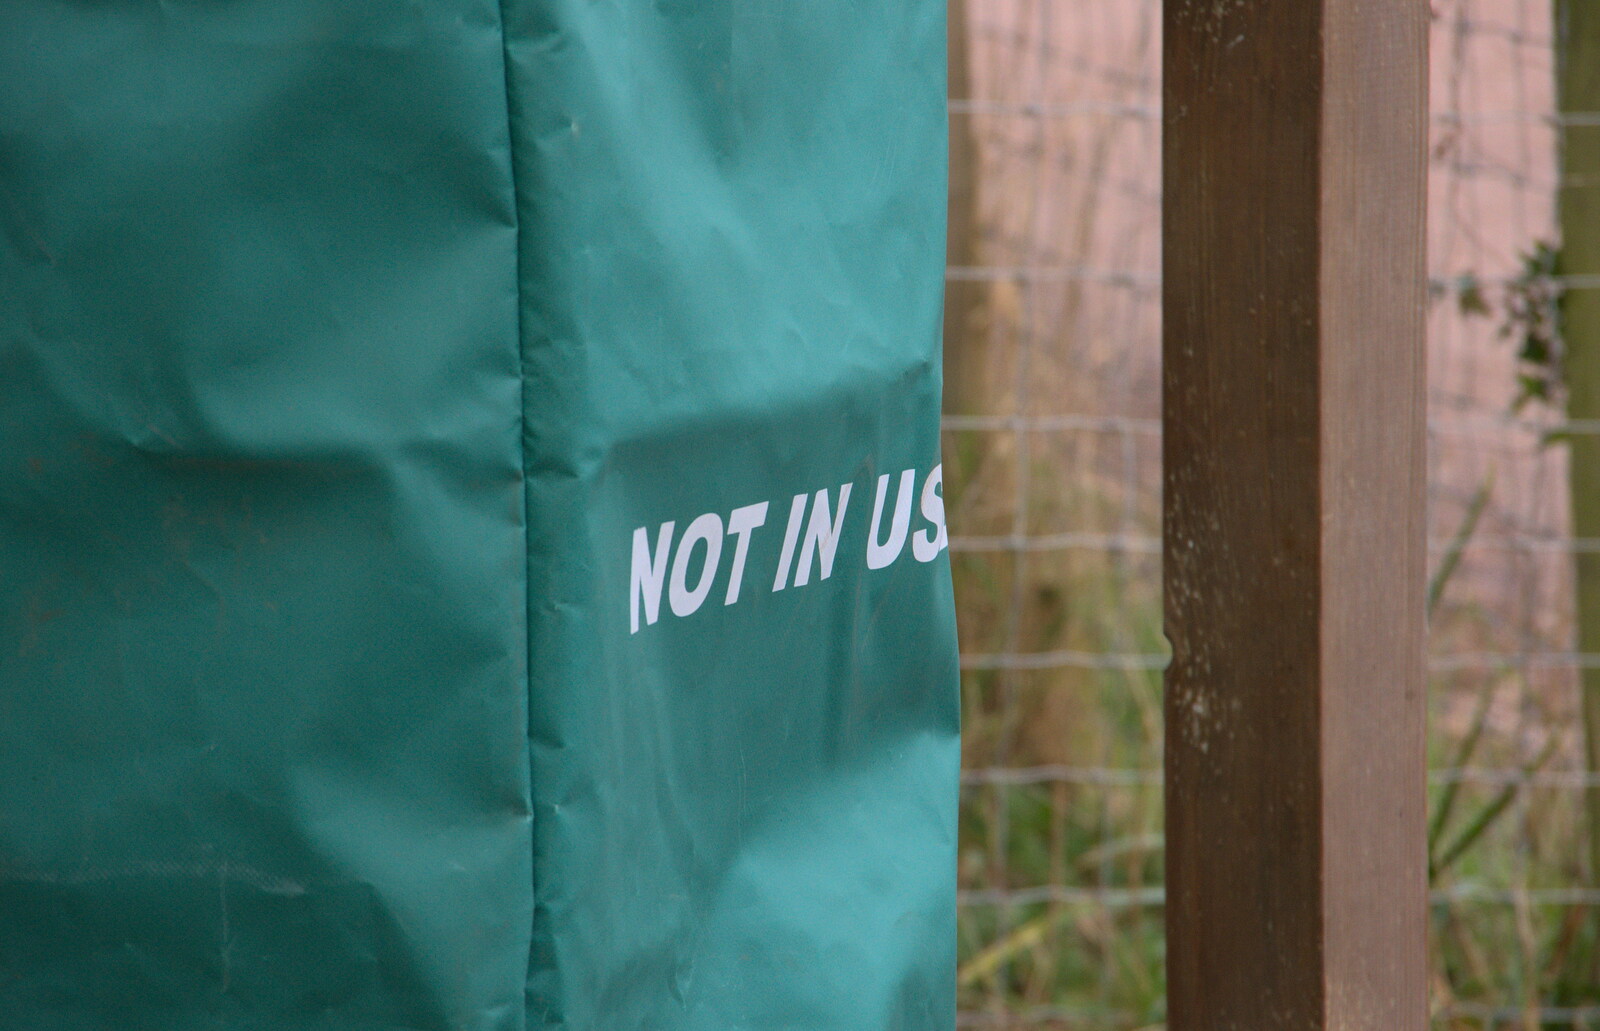 'Not in us' apparently from Killerton House, Broadclyst, Devon - 30th December 2017